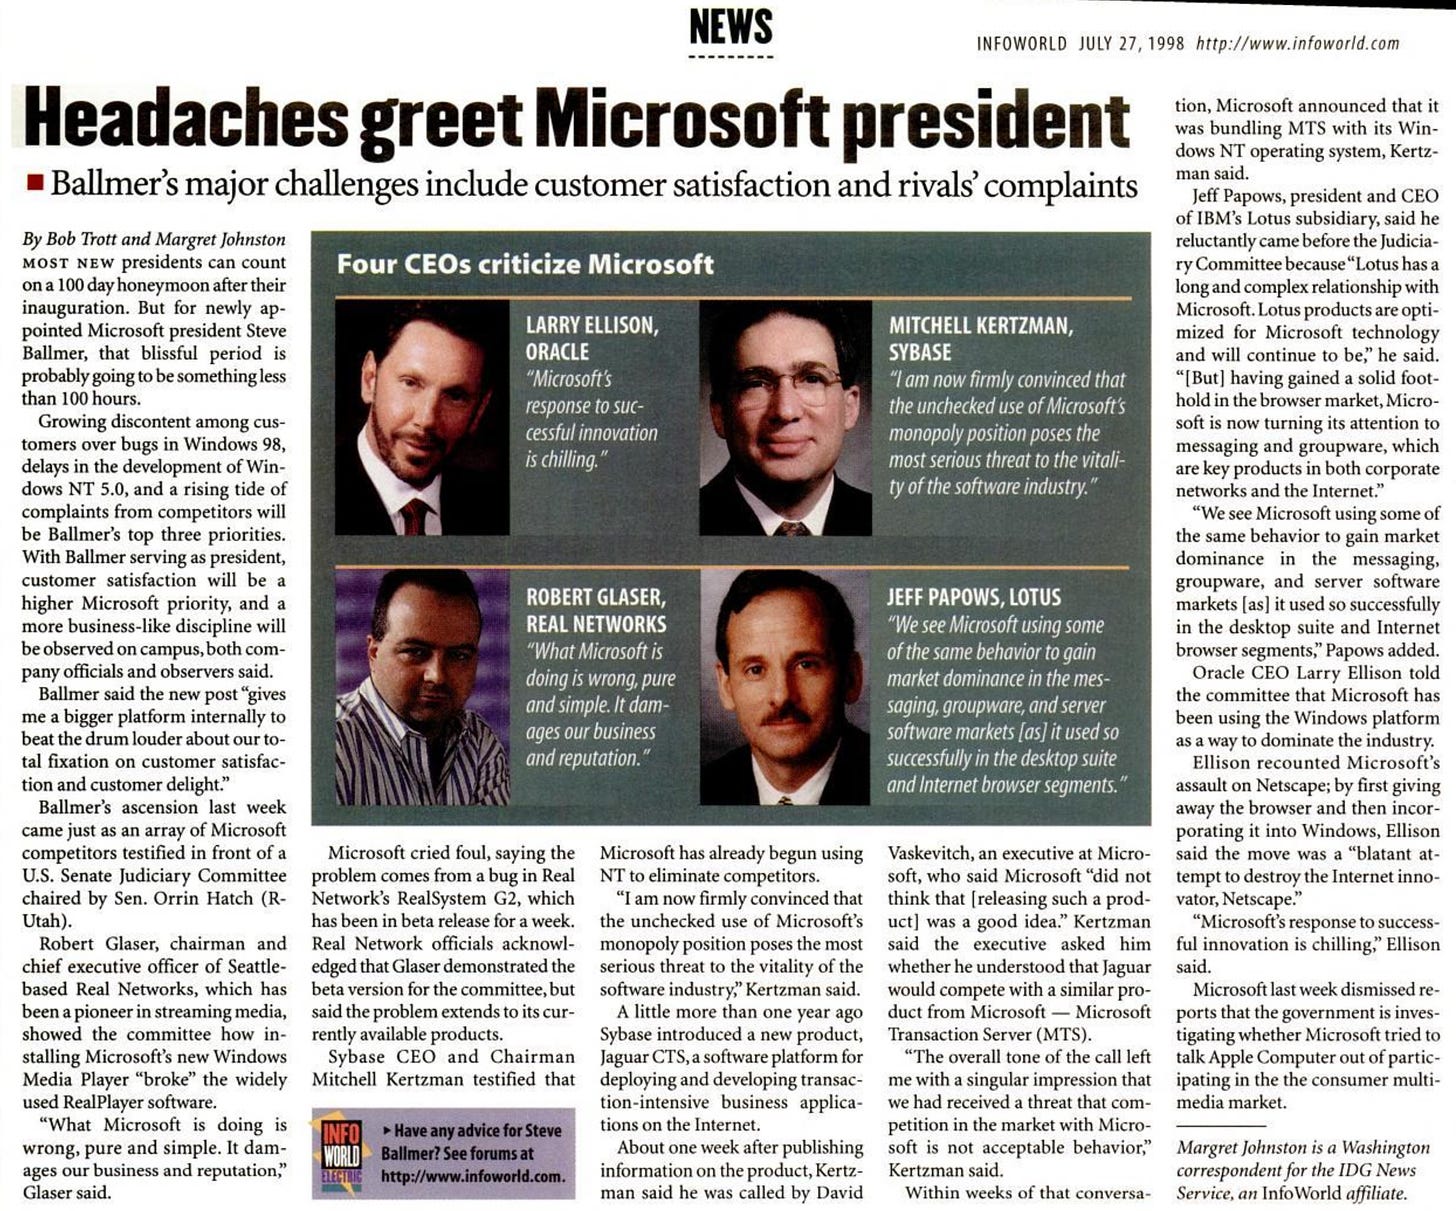 Scanned article "Headaches greet Microsoft president: Ballmer's major challenges include customer satisfaction and rival's complaints"